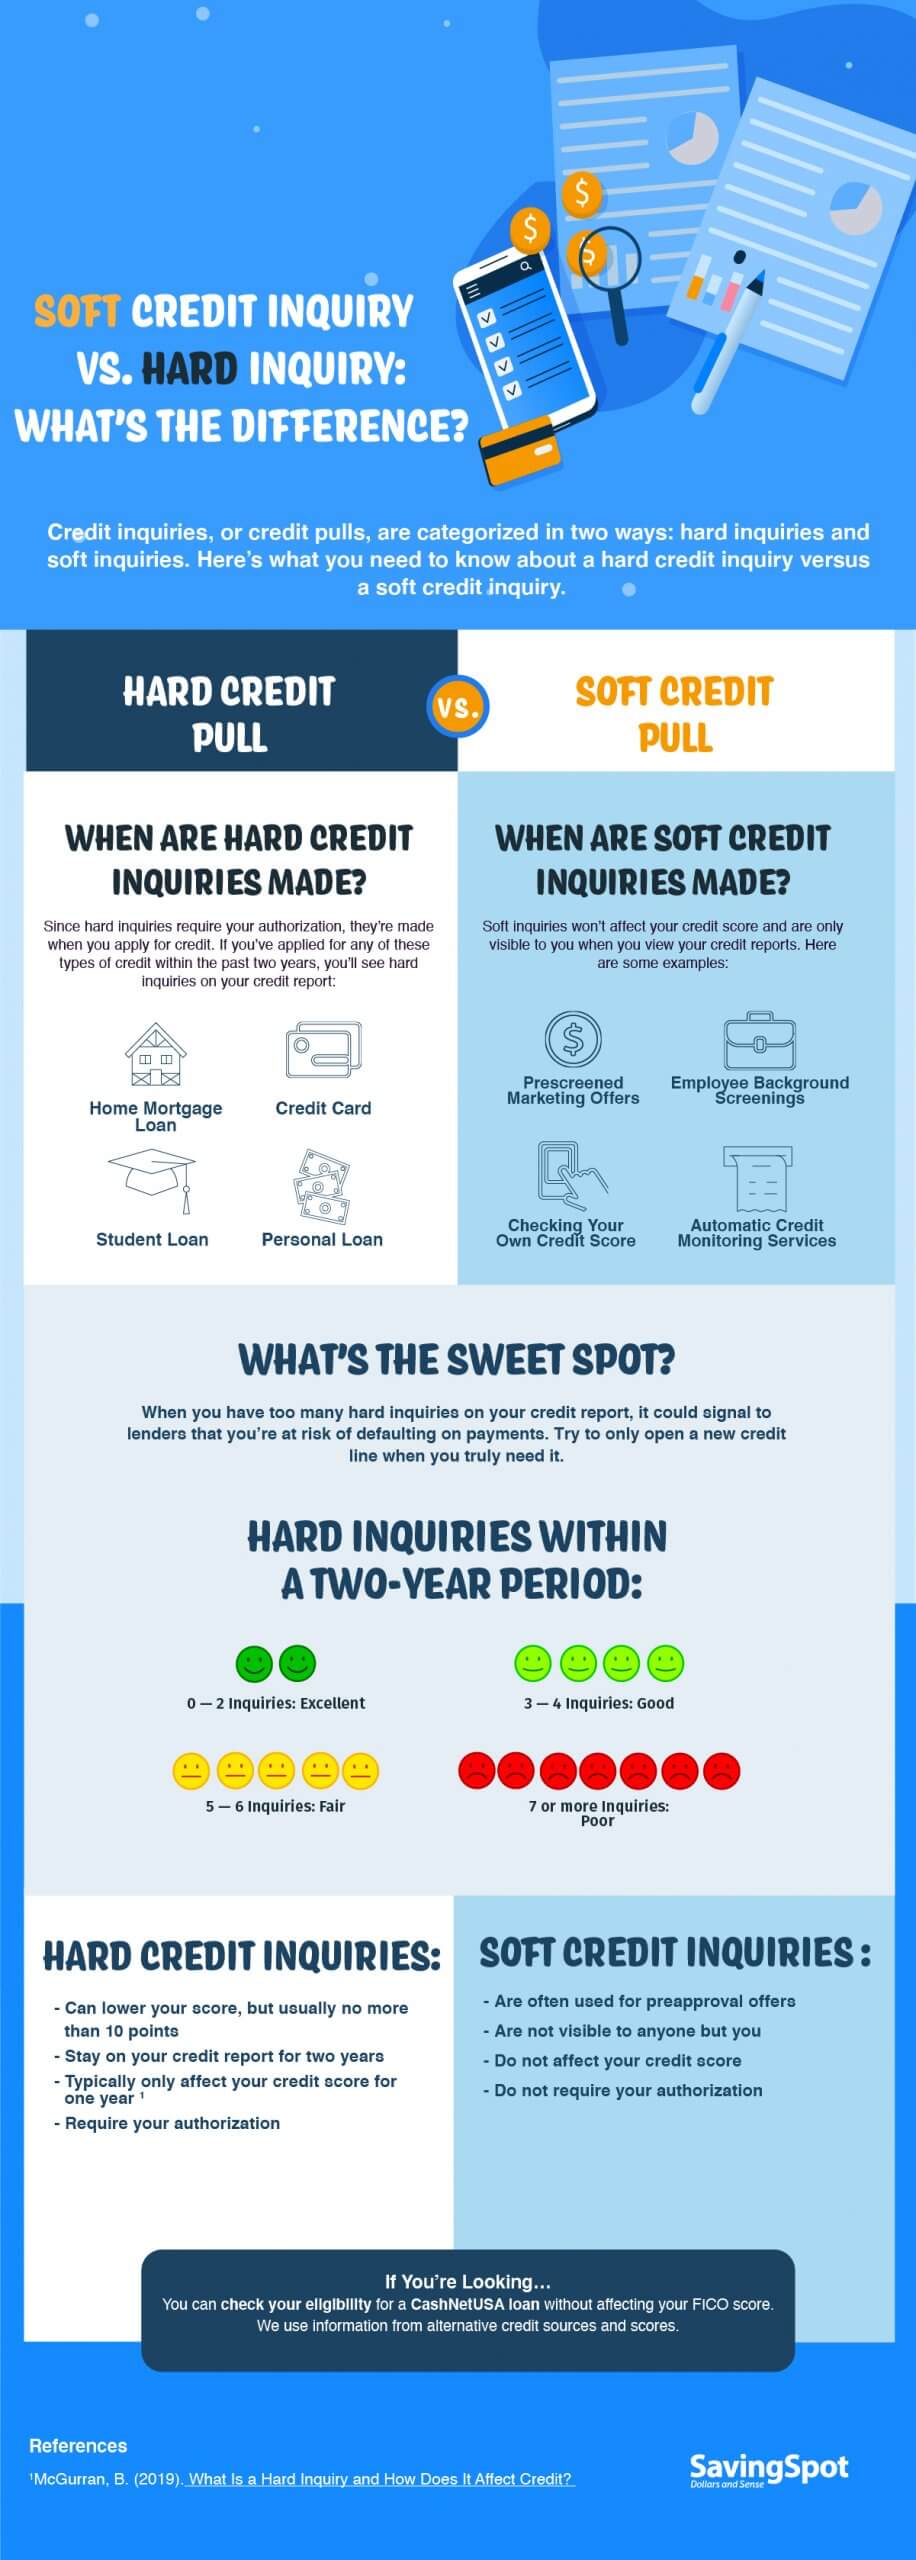 Soft Inquiry versus Hard Inquiry: What’s the Difference